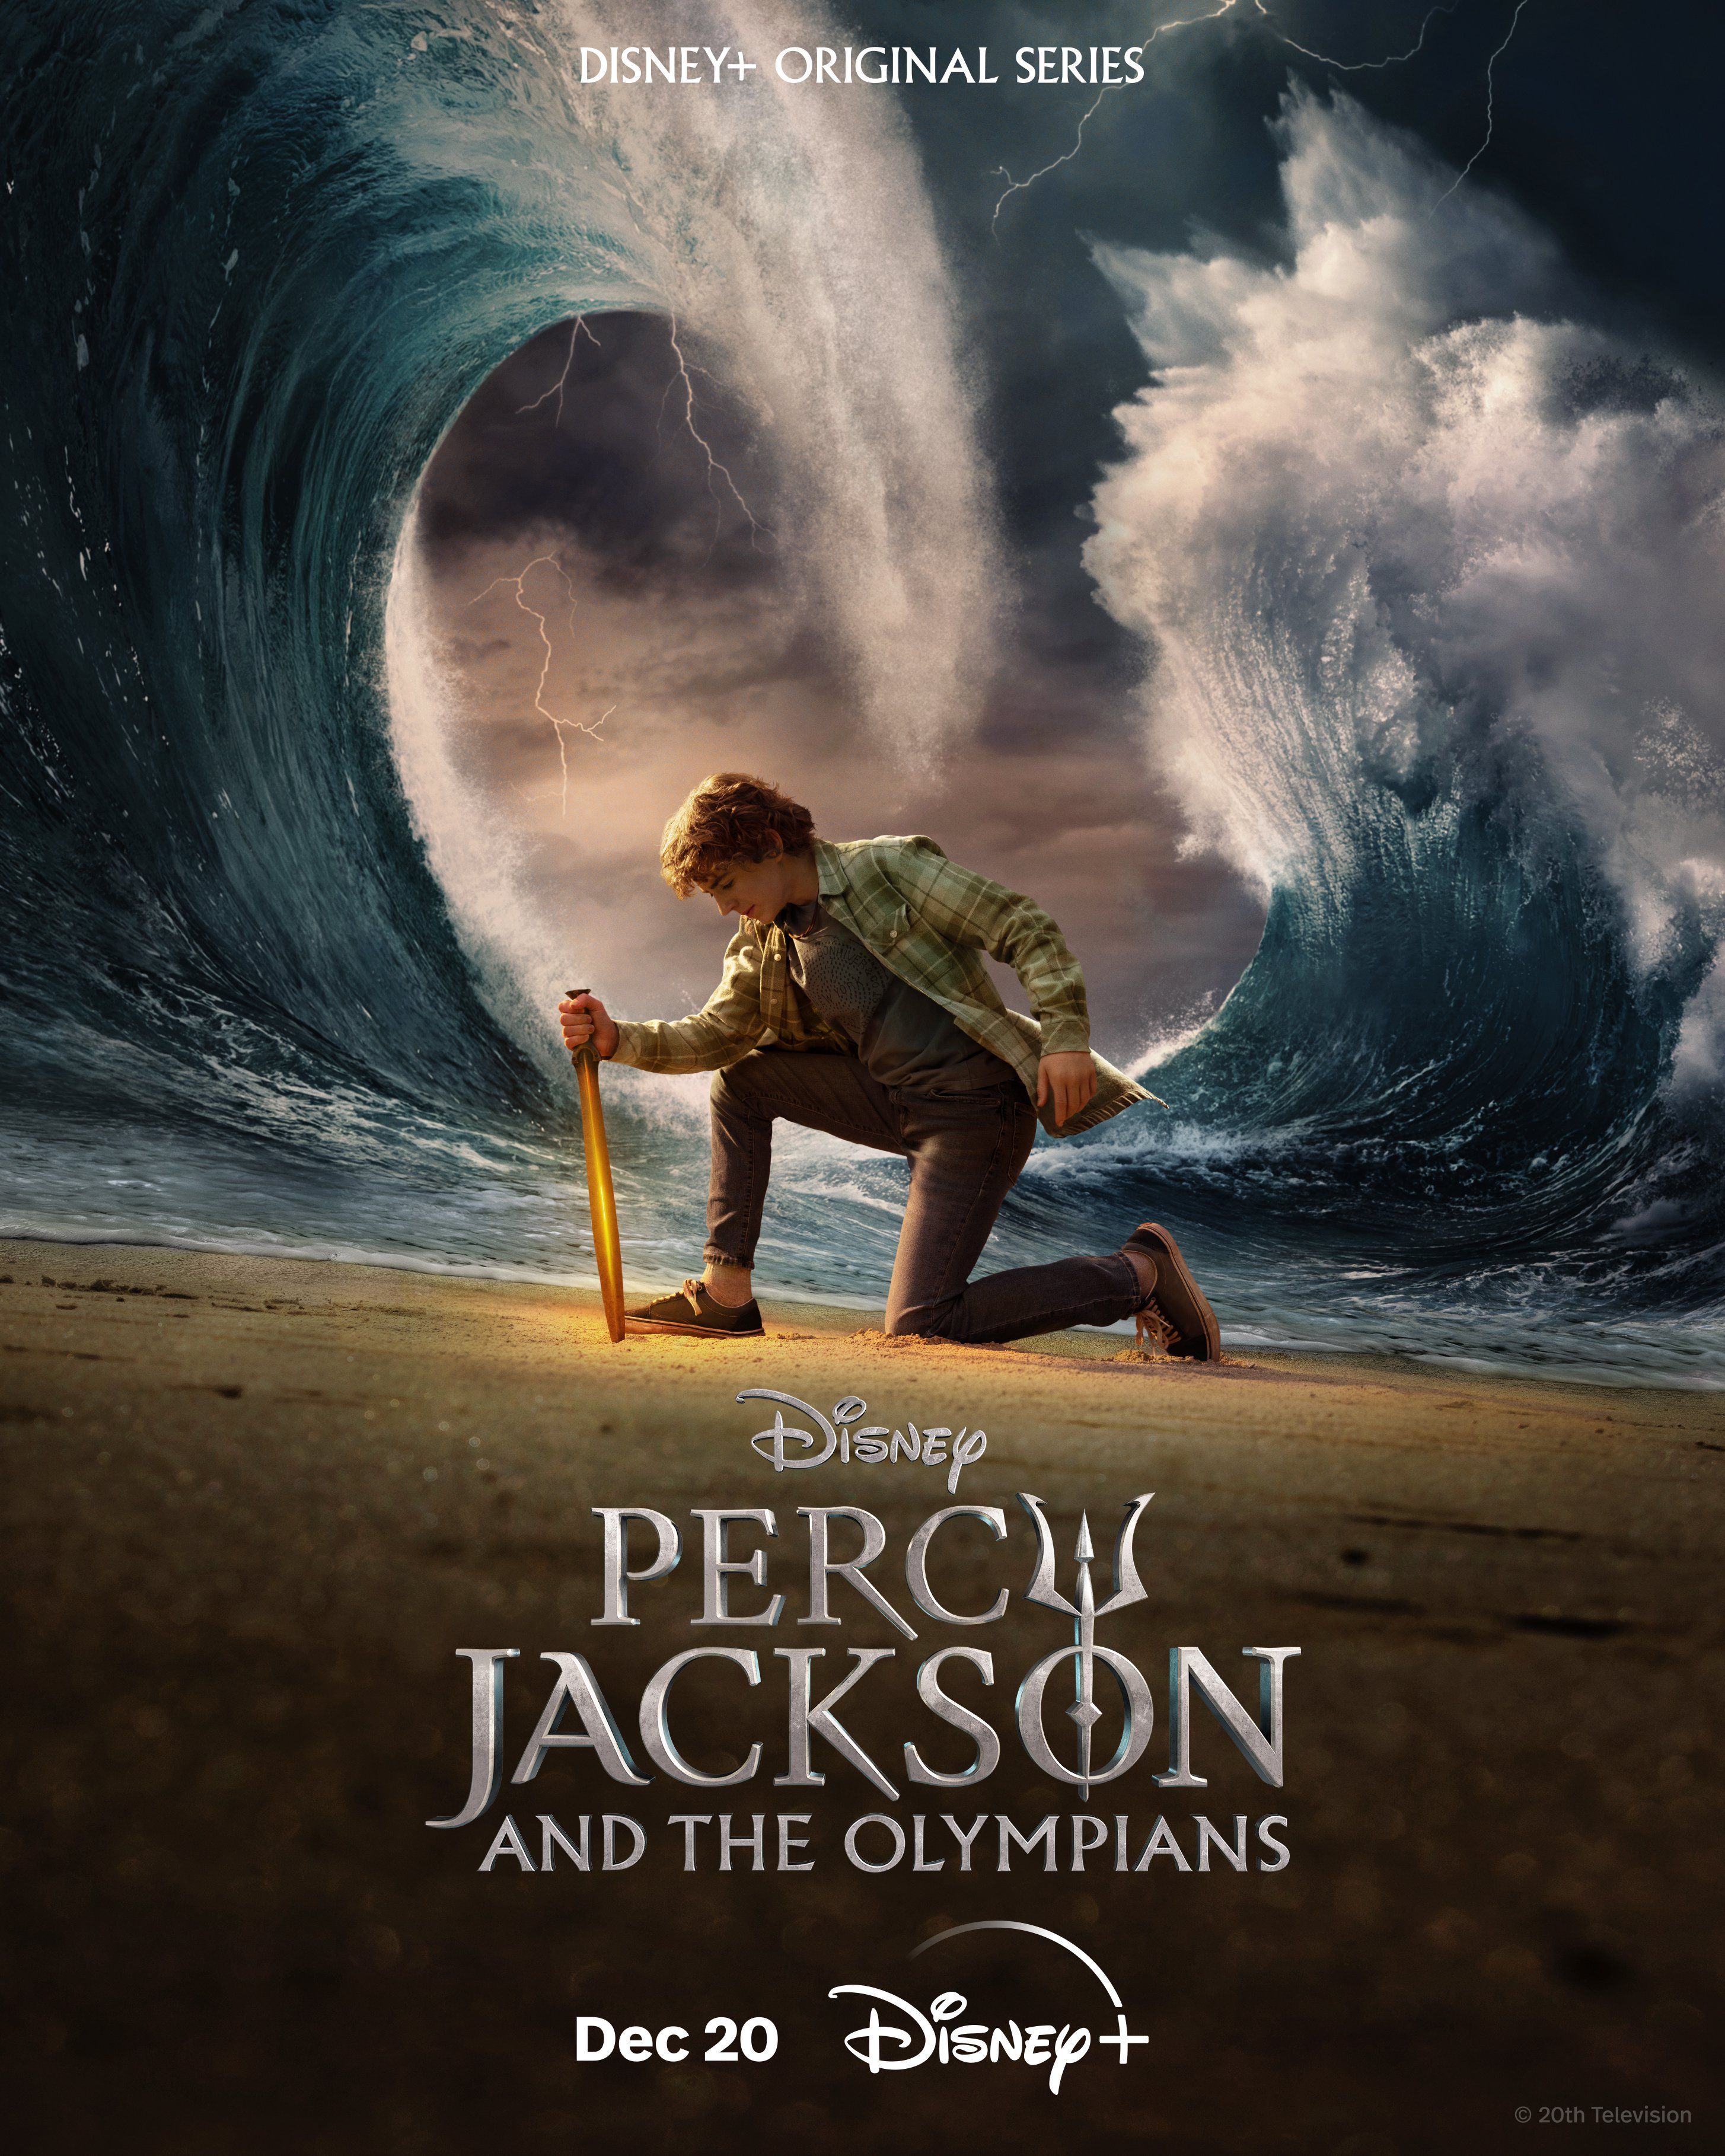 Walker Scobell as Percy Jackson controls the sea on new poster for Percy Jackson and the Olympians